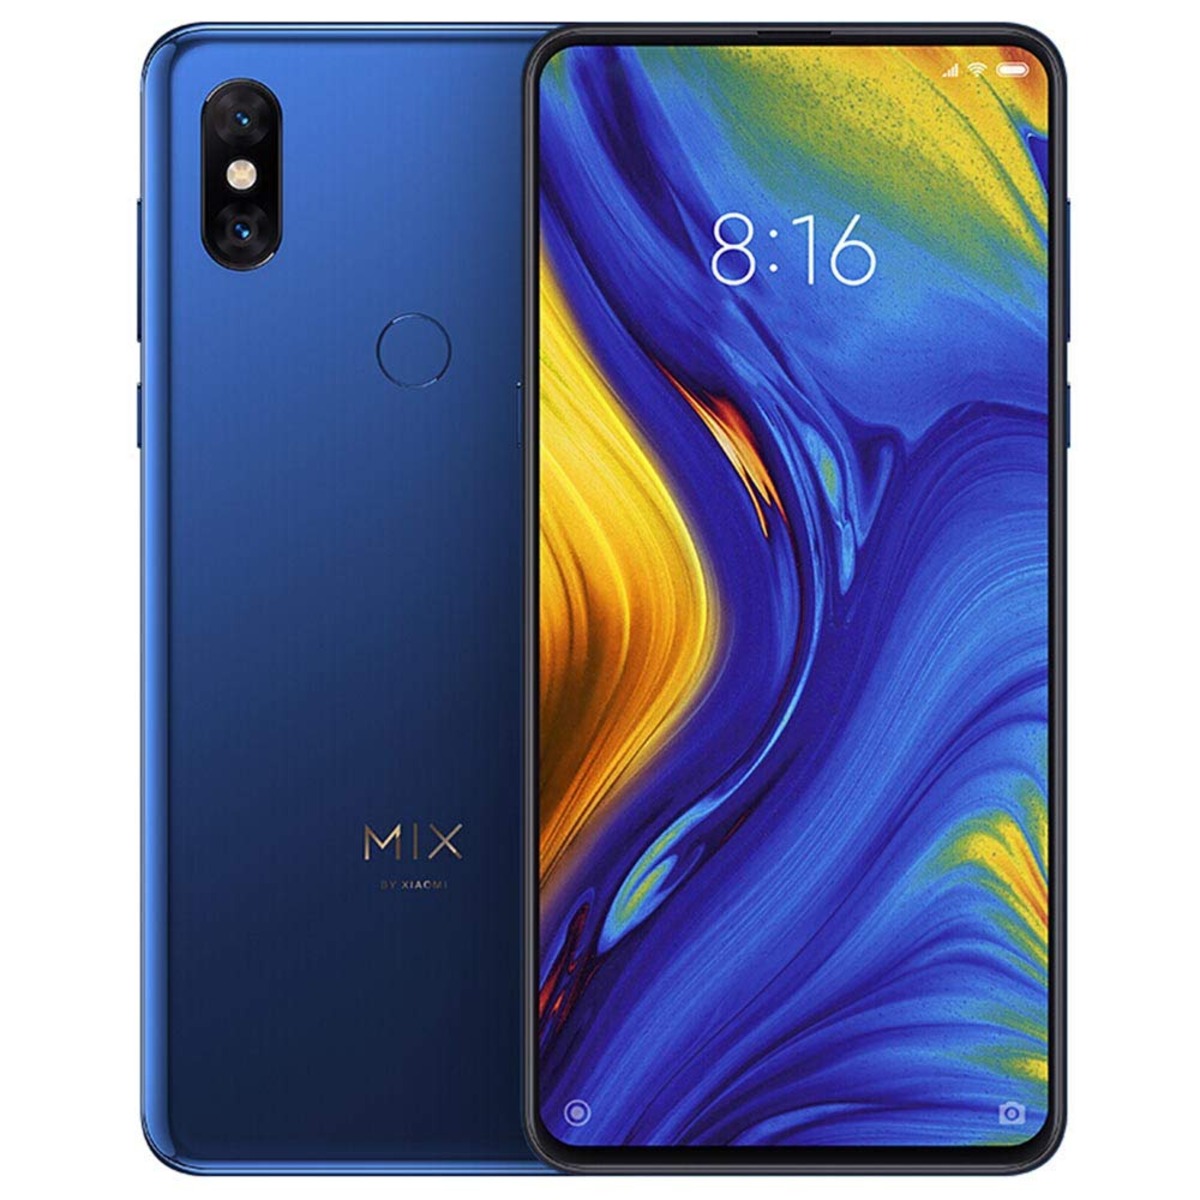 xiaomi-to-launch-new-mi-mix-phone-on-march-29